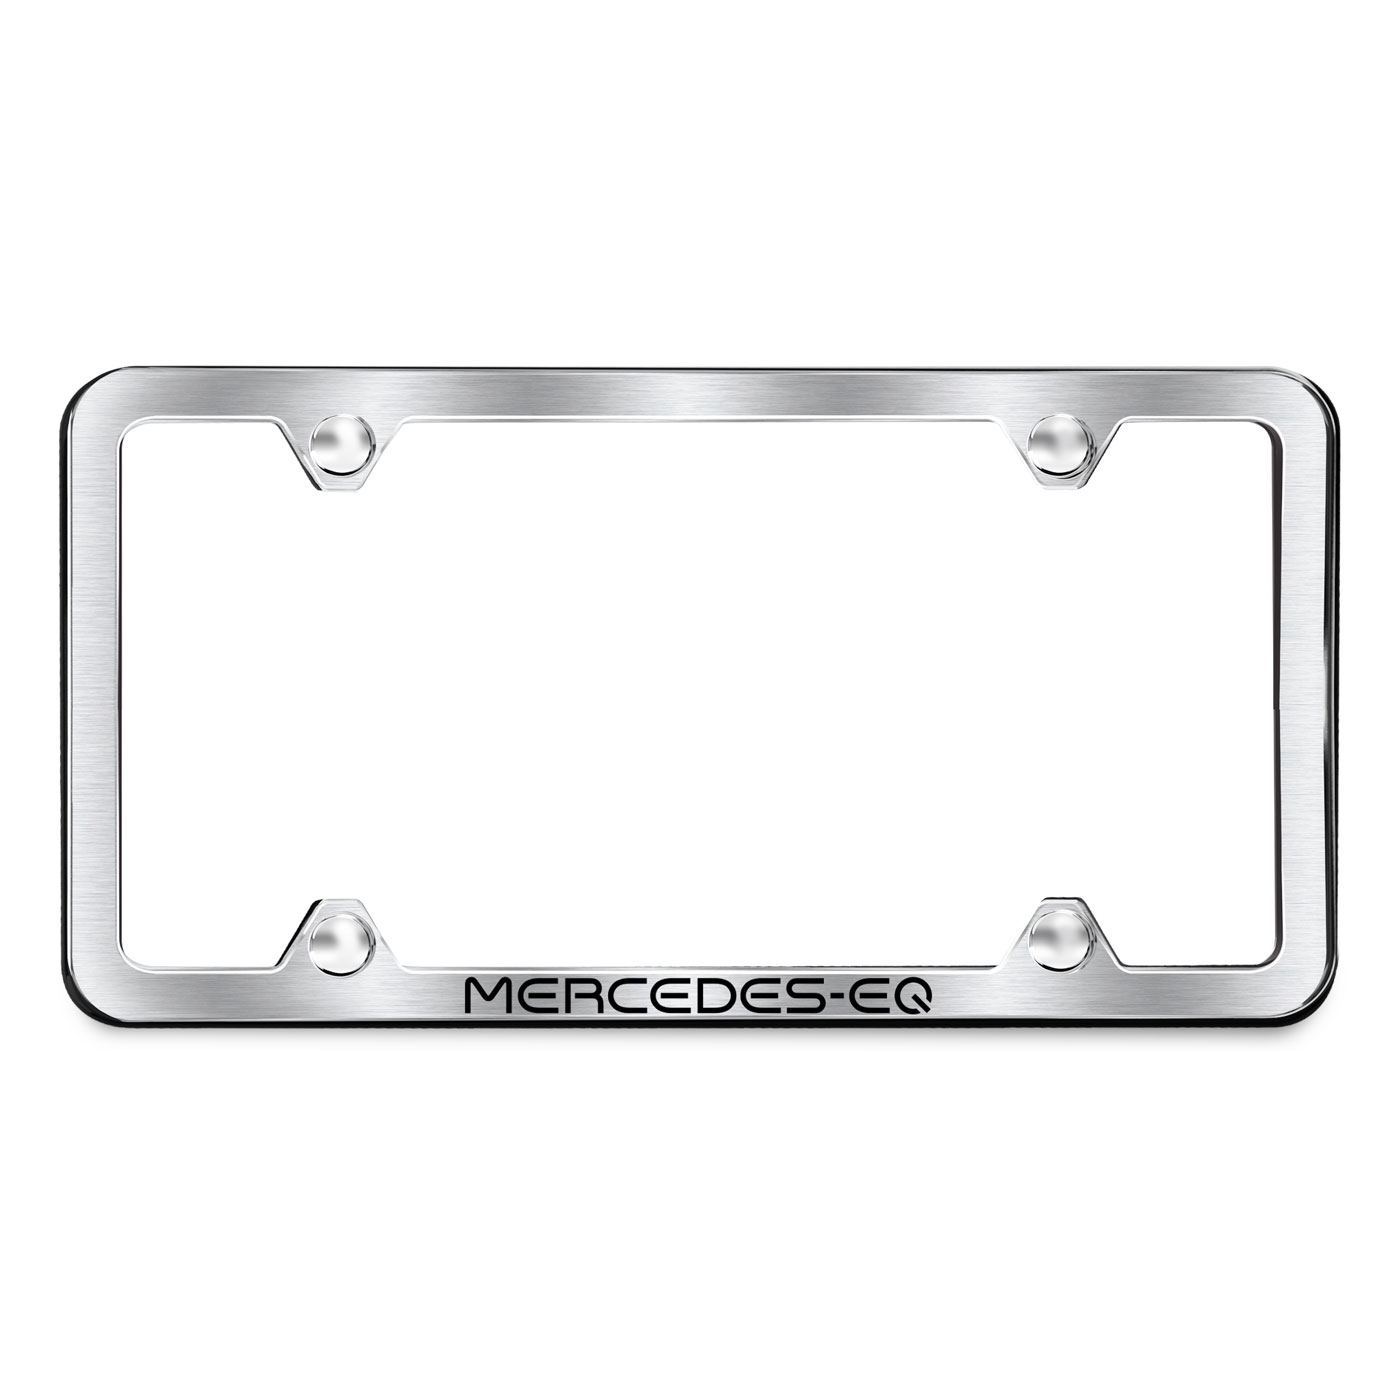 Fit Mercedes Benz Stainless Steel Chrome License Plate Frame Laser Engraved